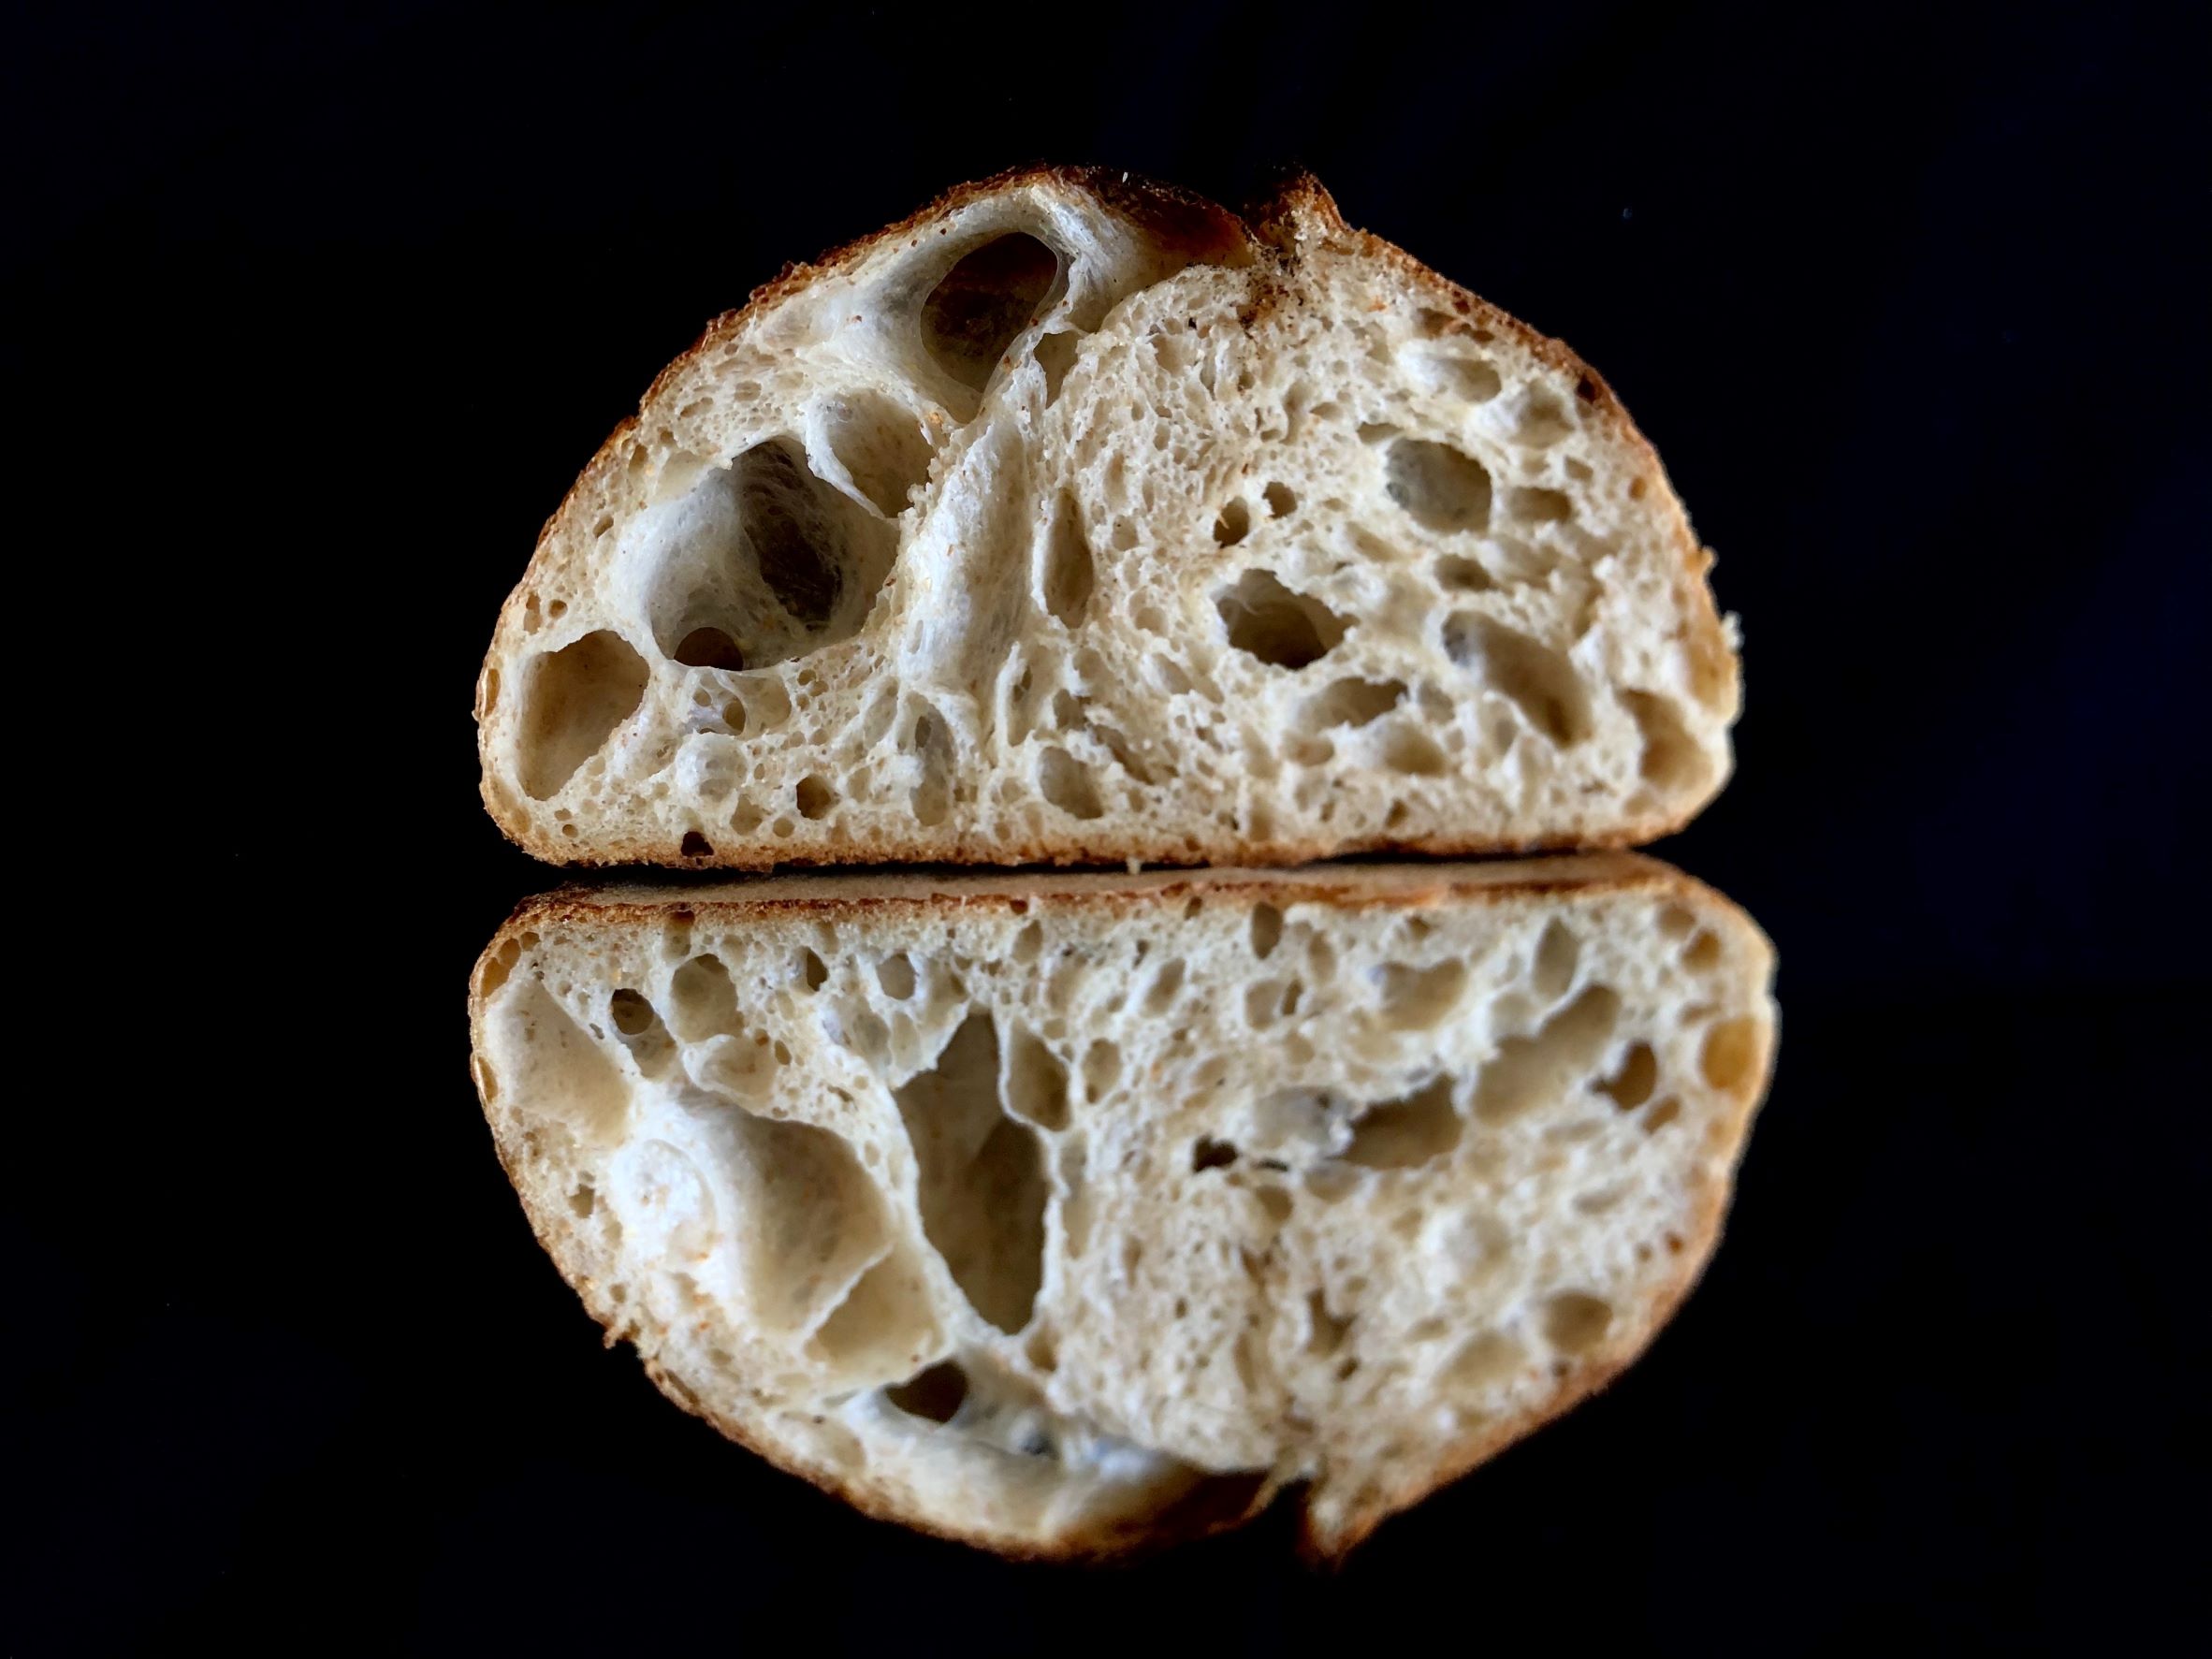 Next Face-to-Face Class | Intro to Sourdough Bread Making - 18/02/2023